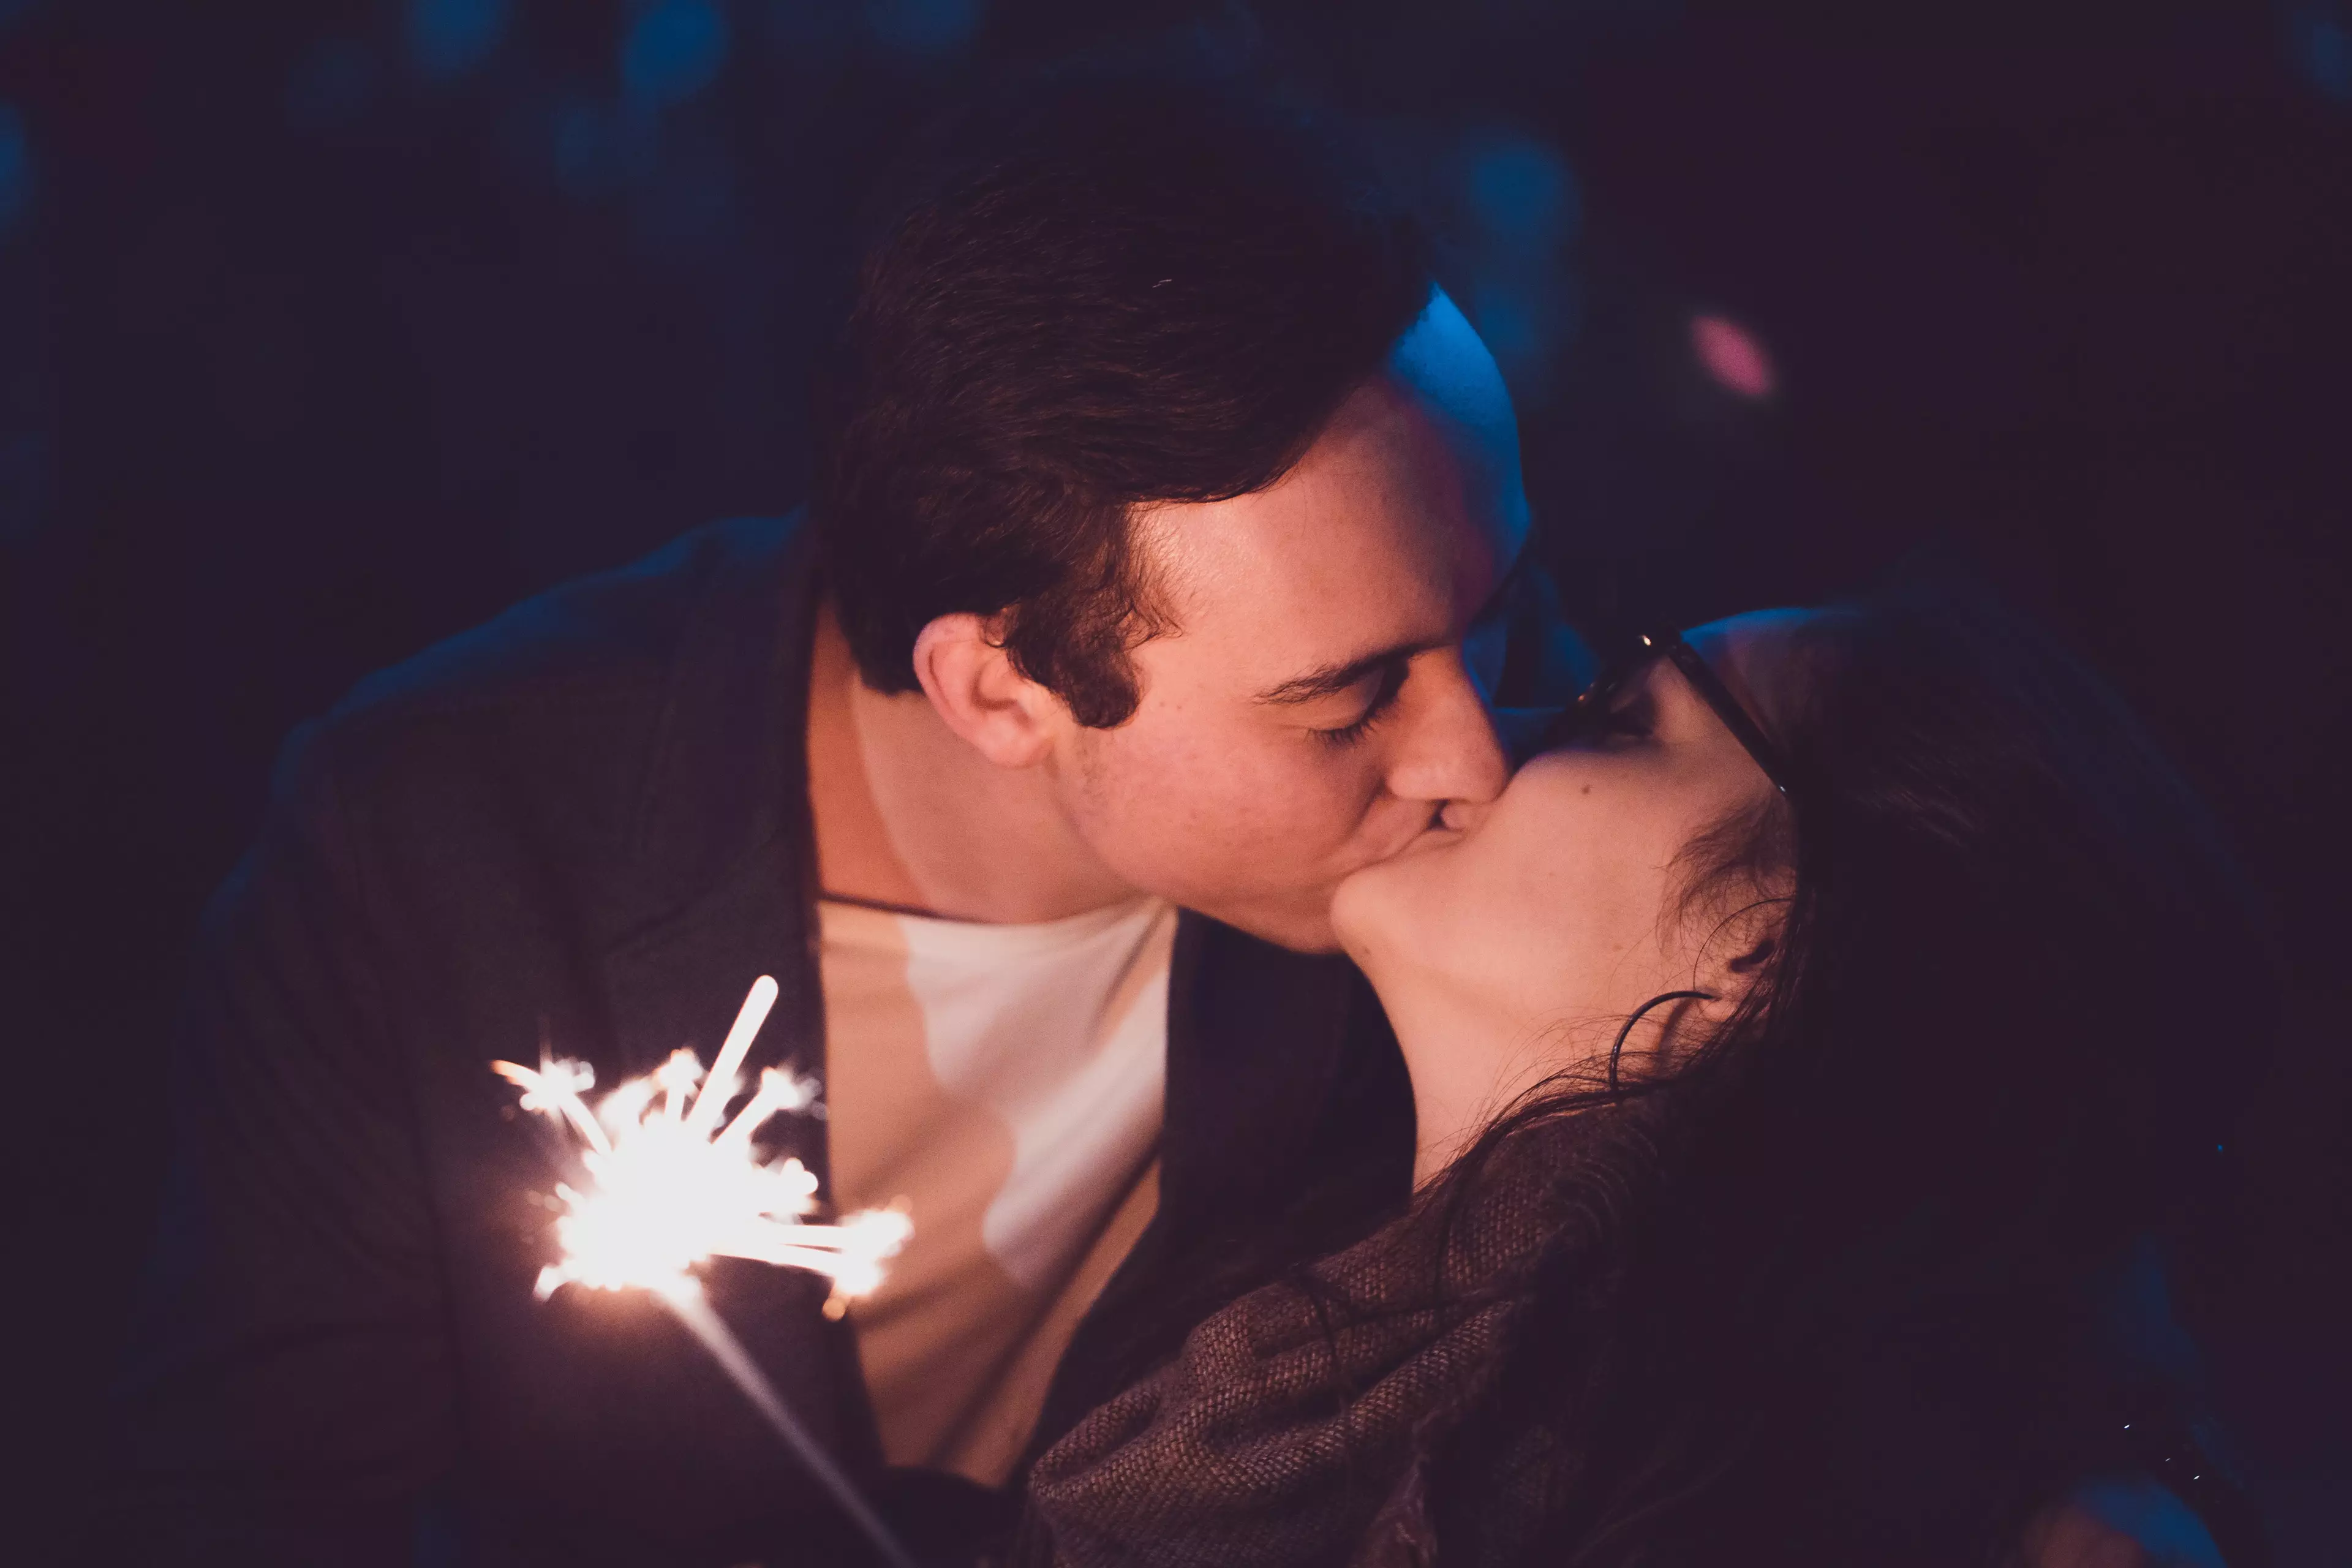 Kissing a stranger could soon be a thing of the past (